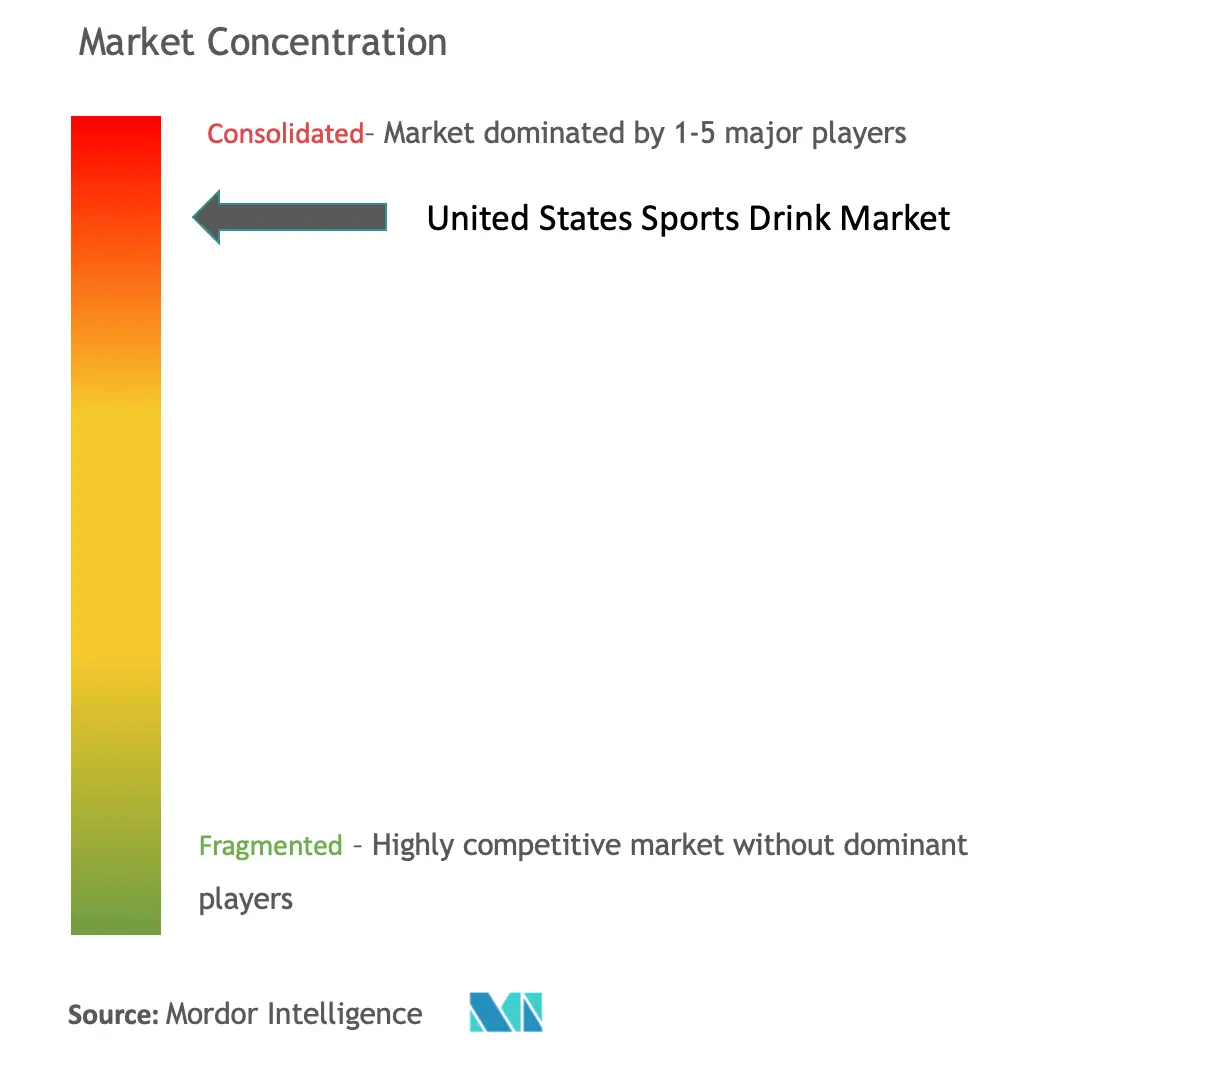 United States Sports Drink Market Concentration